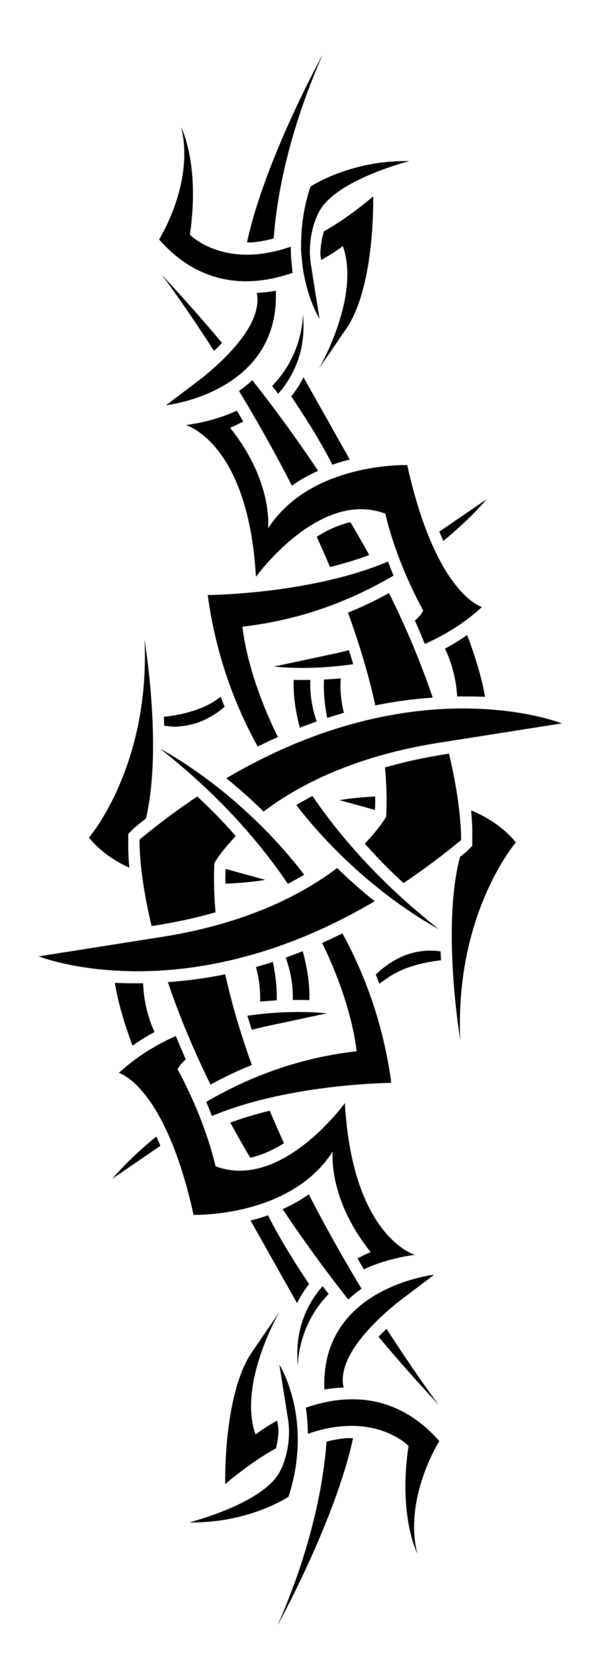 Tato Tribal.png - ClipArt Best